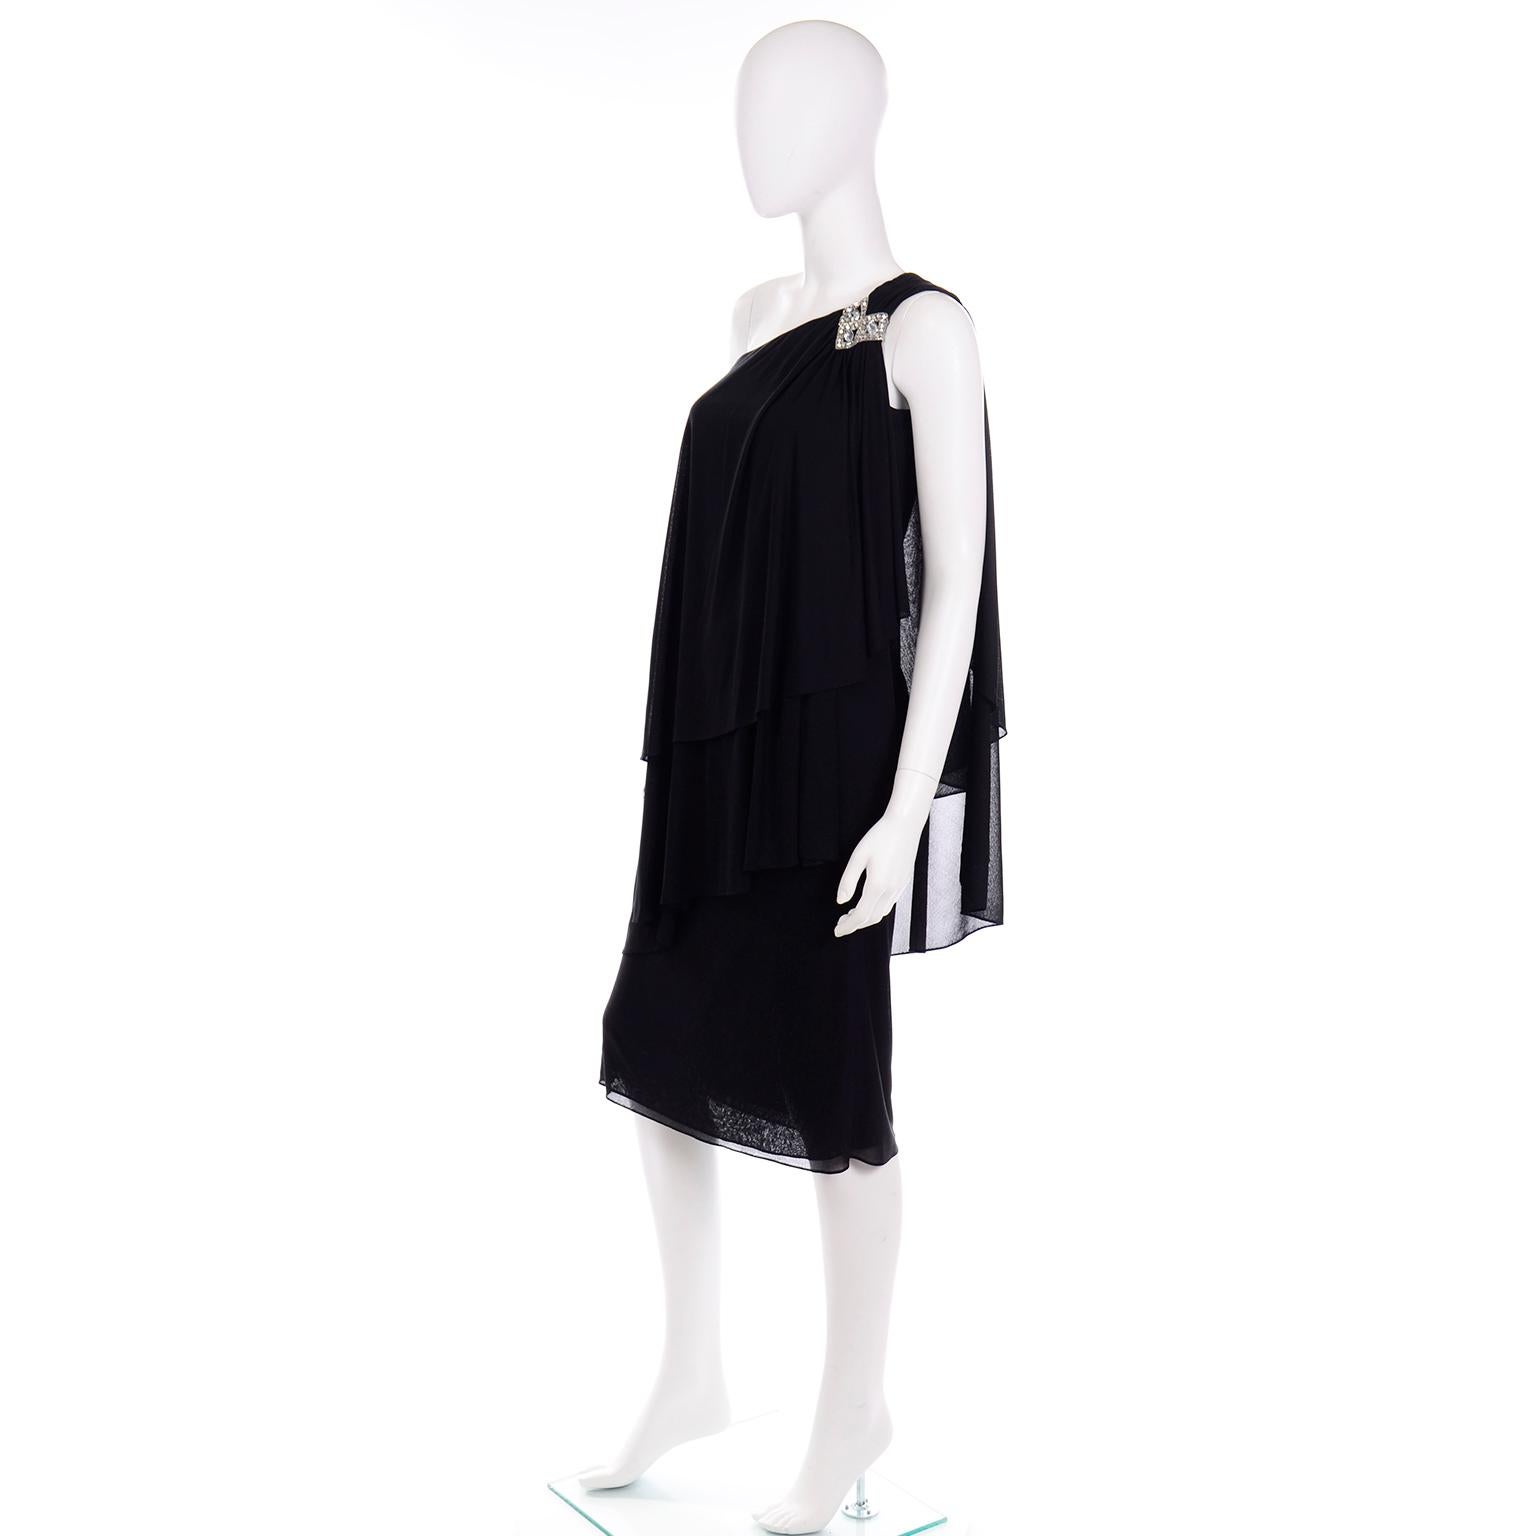 Lilli Diamond Vintage Black 1970s One Shoulder Grecian Evening Dress w Jewel In Excellent Condition For Sale In Portland, OR